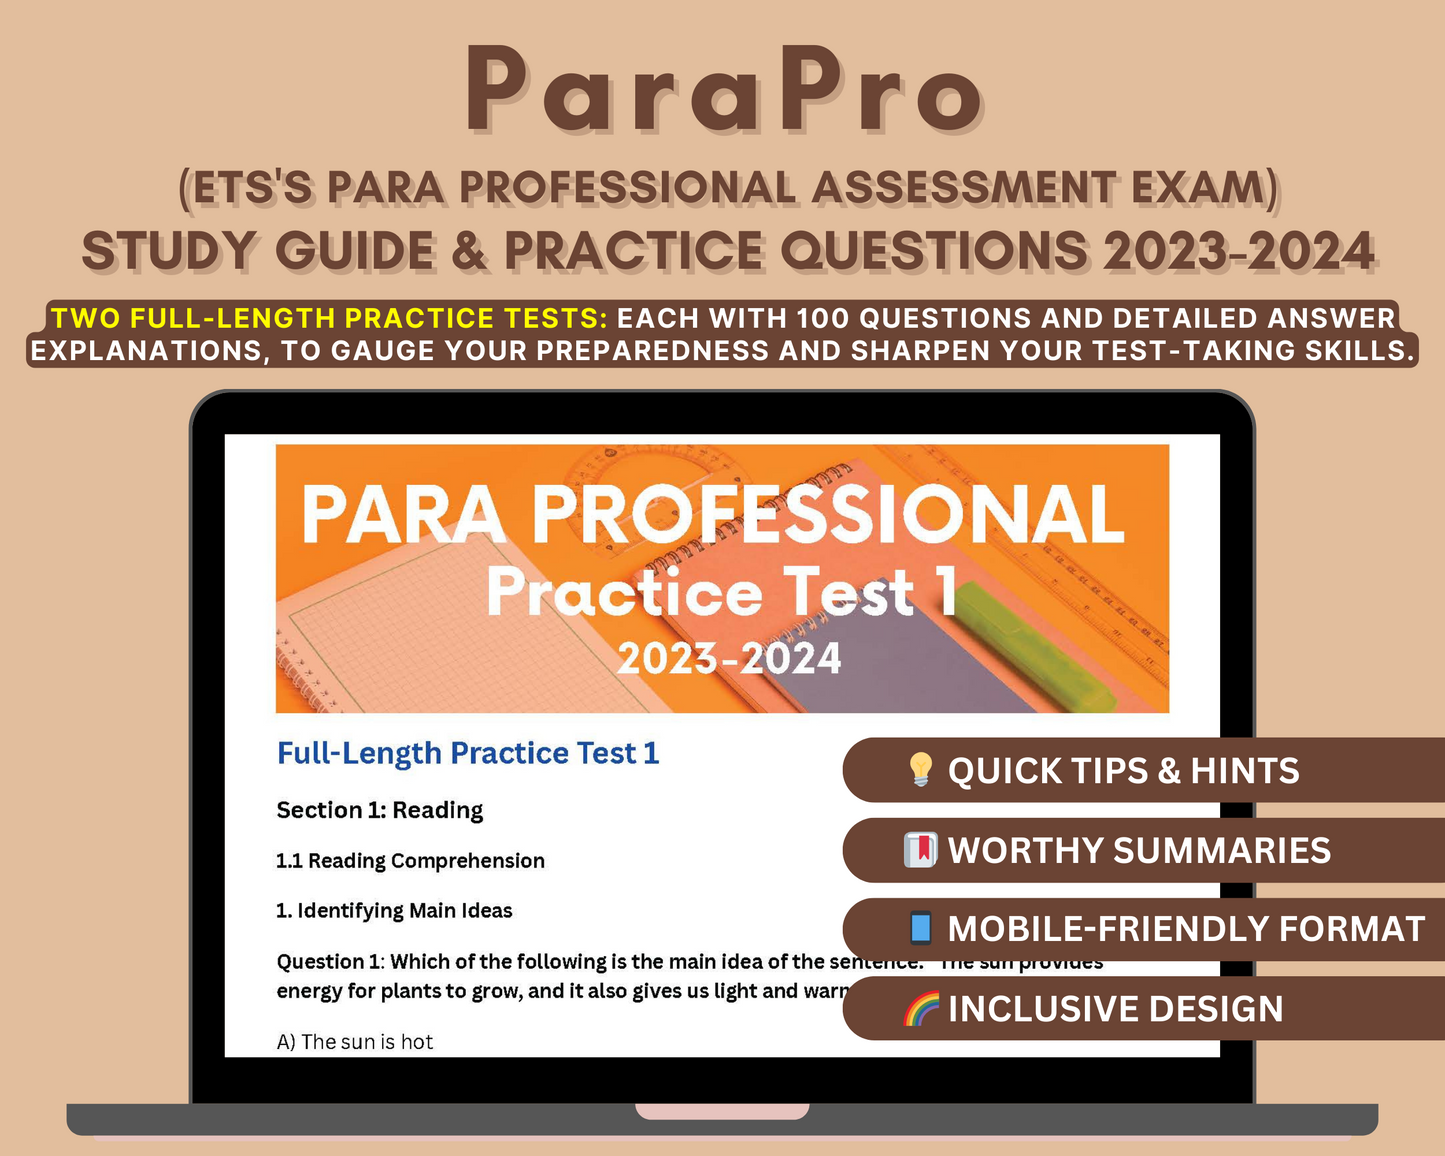 ParaPro Assessment Study Guide 2023-2024: In-Depth Content Review & Practice Tests for Reading, Writing, and Math